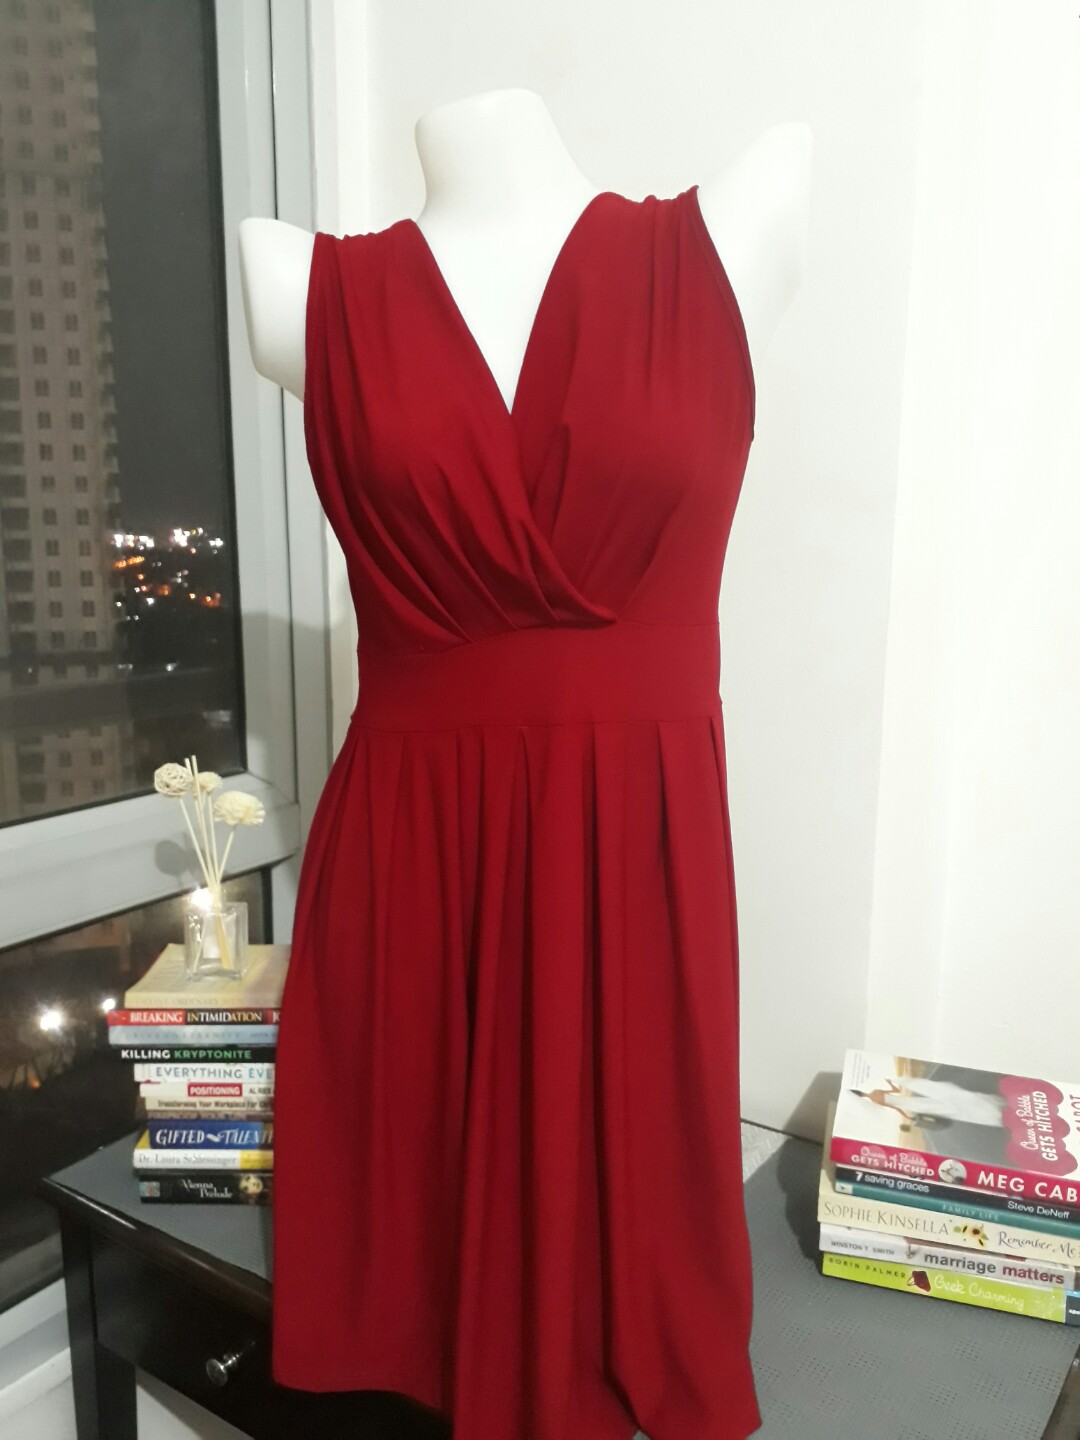 red cocktail dress long